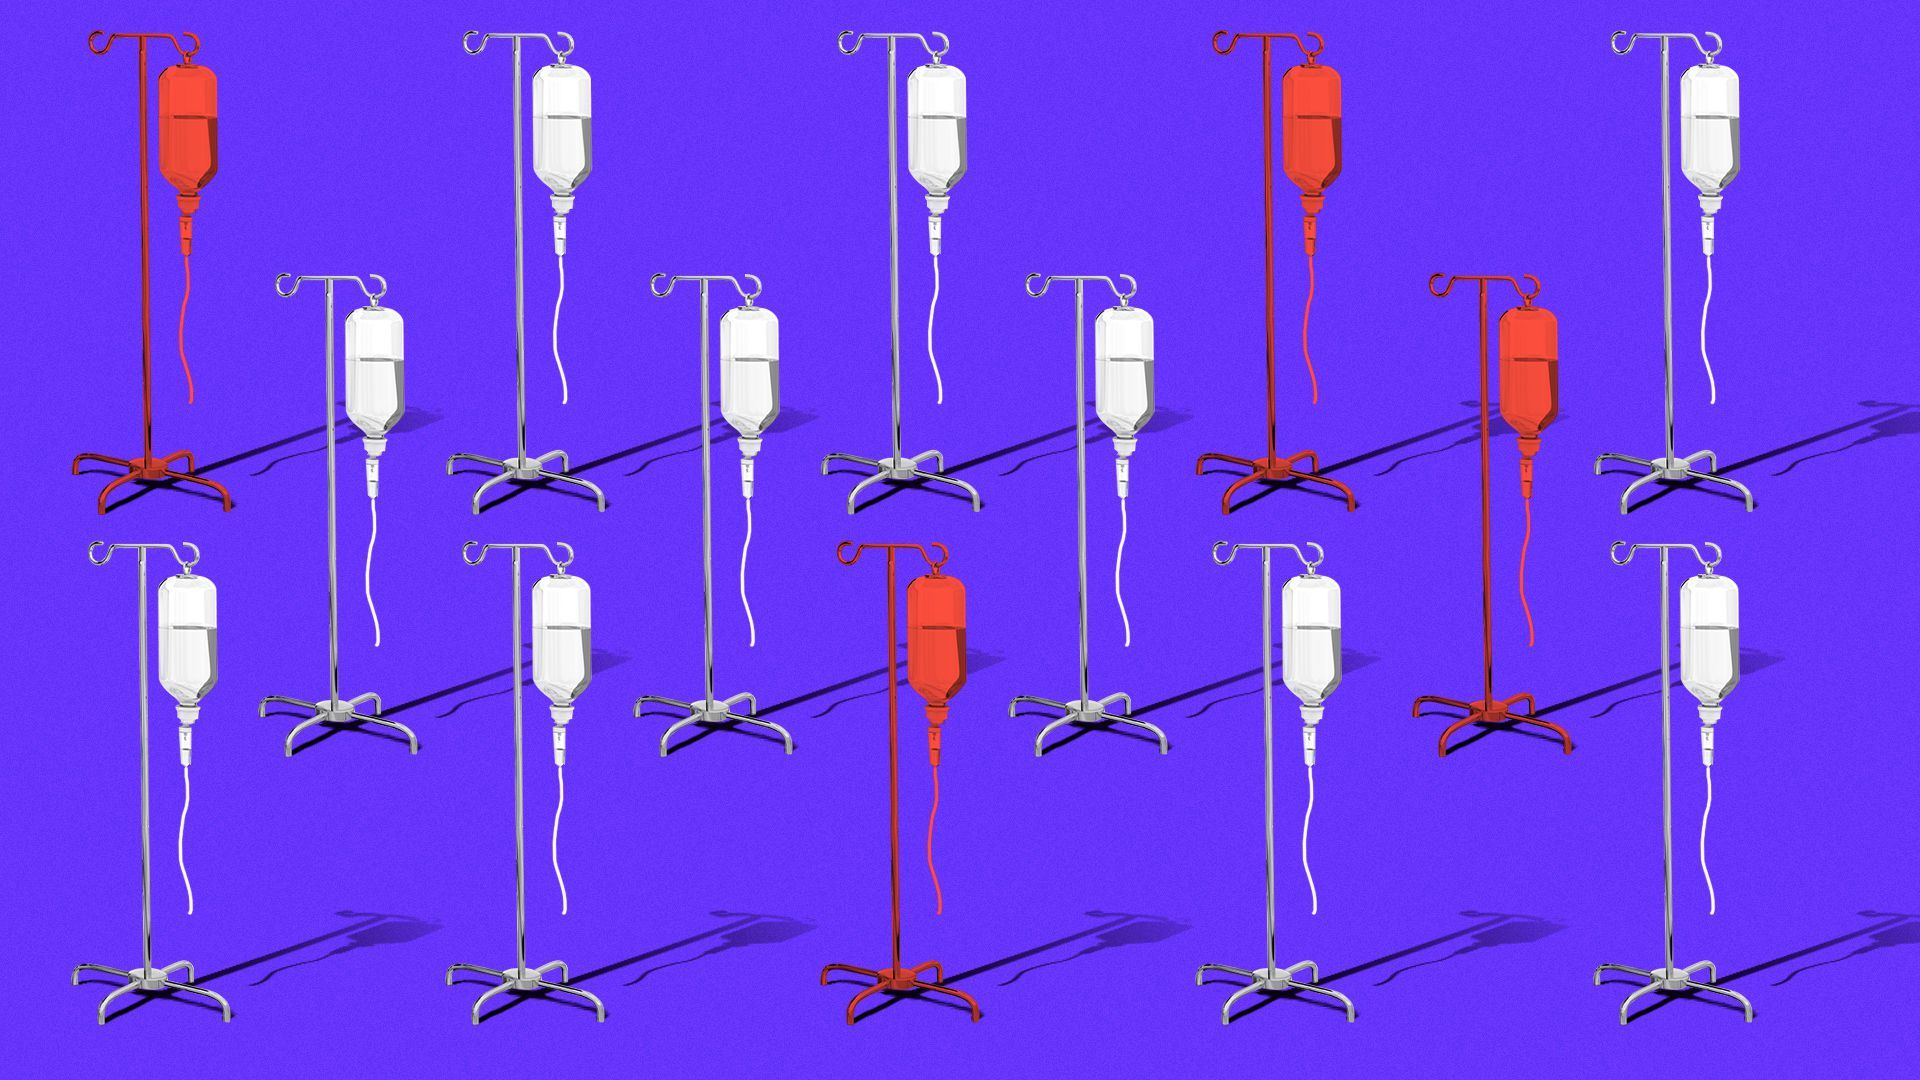 Illustration of a repeating pattern of IV drips with random ones highlighted. 